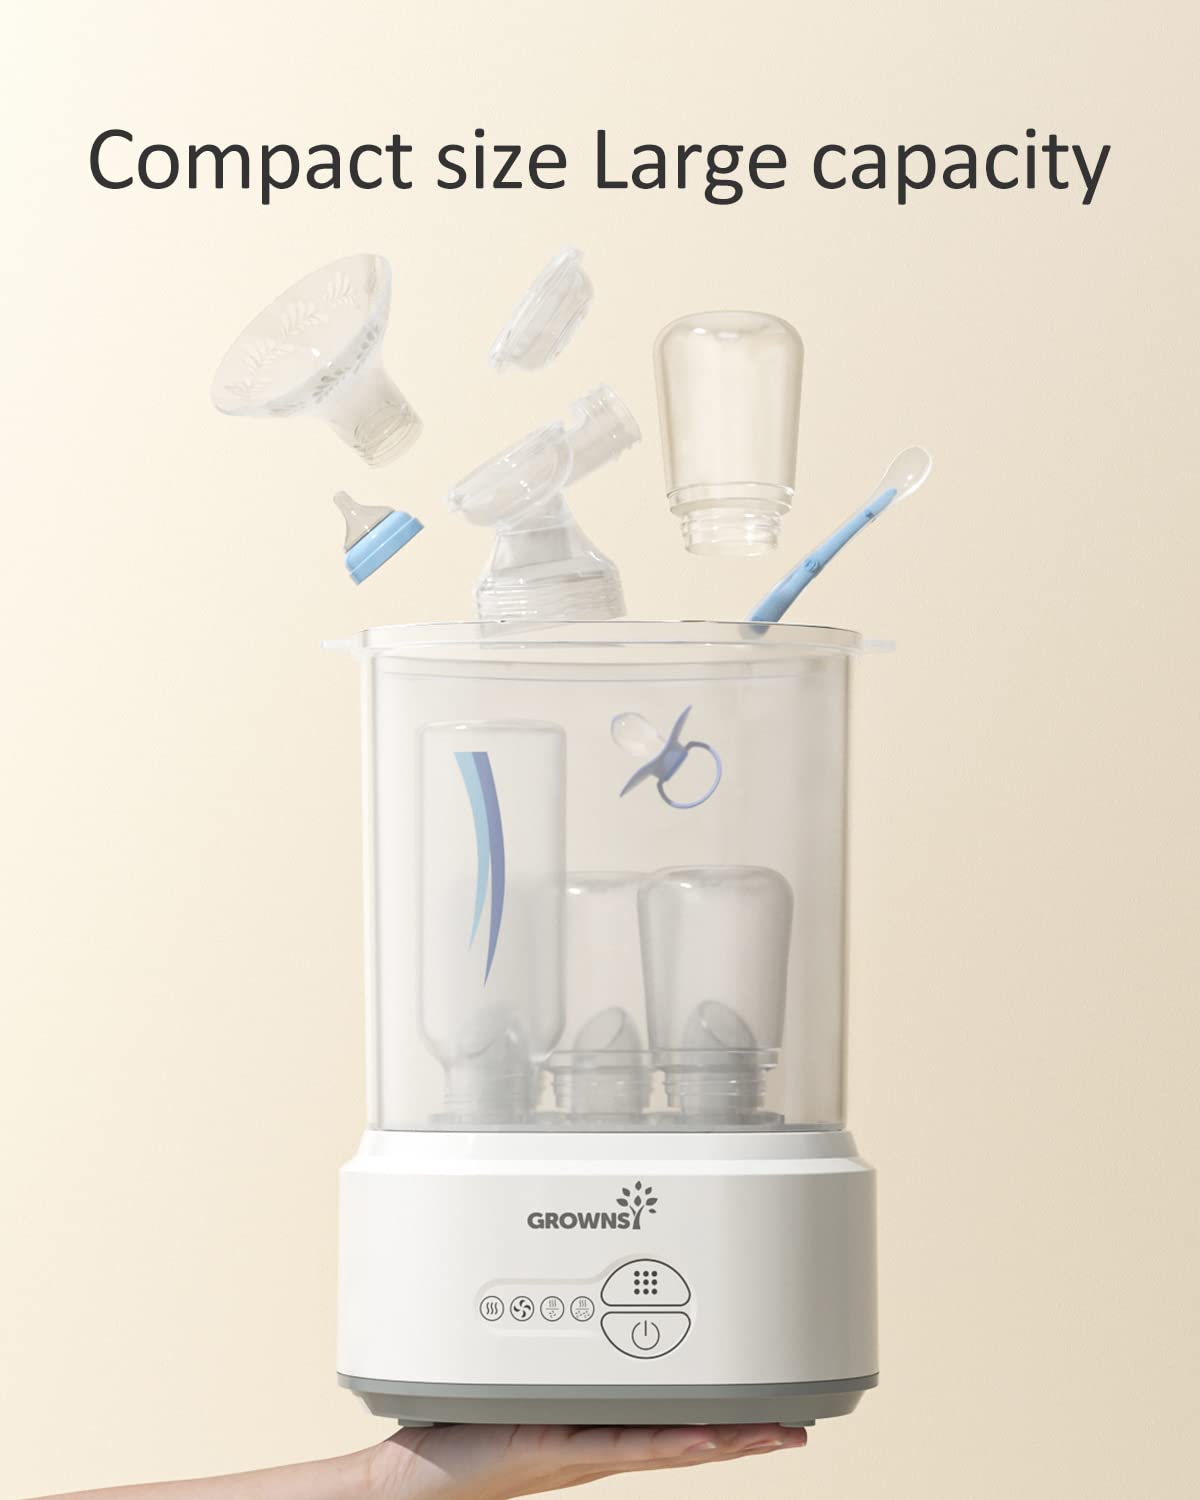 Bottle Sterilizer and Dryer, Compact Electric Steam Baby Bottle Sterilizer (Esterilizador de Biberones), Bottle Sanitizer for Baby Bottles, Pacifiers, Pump Parts